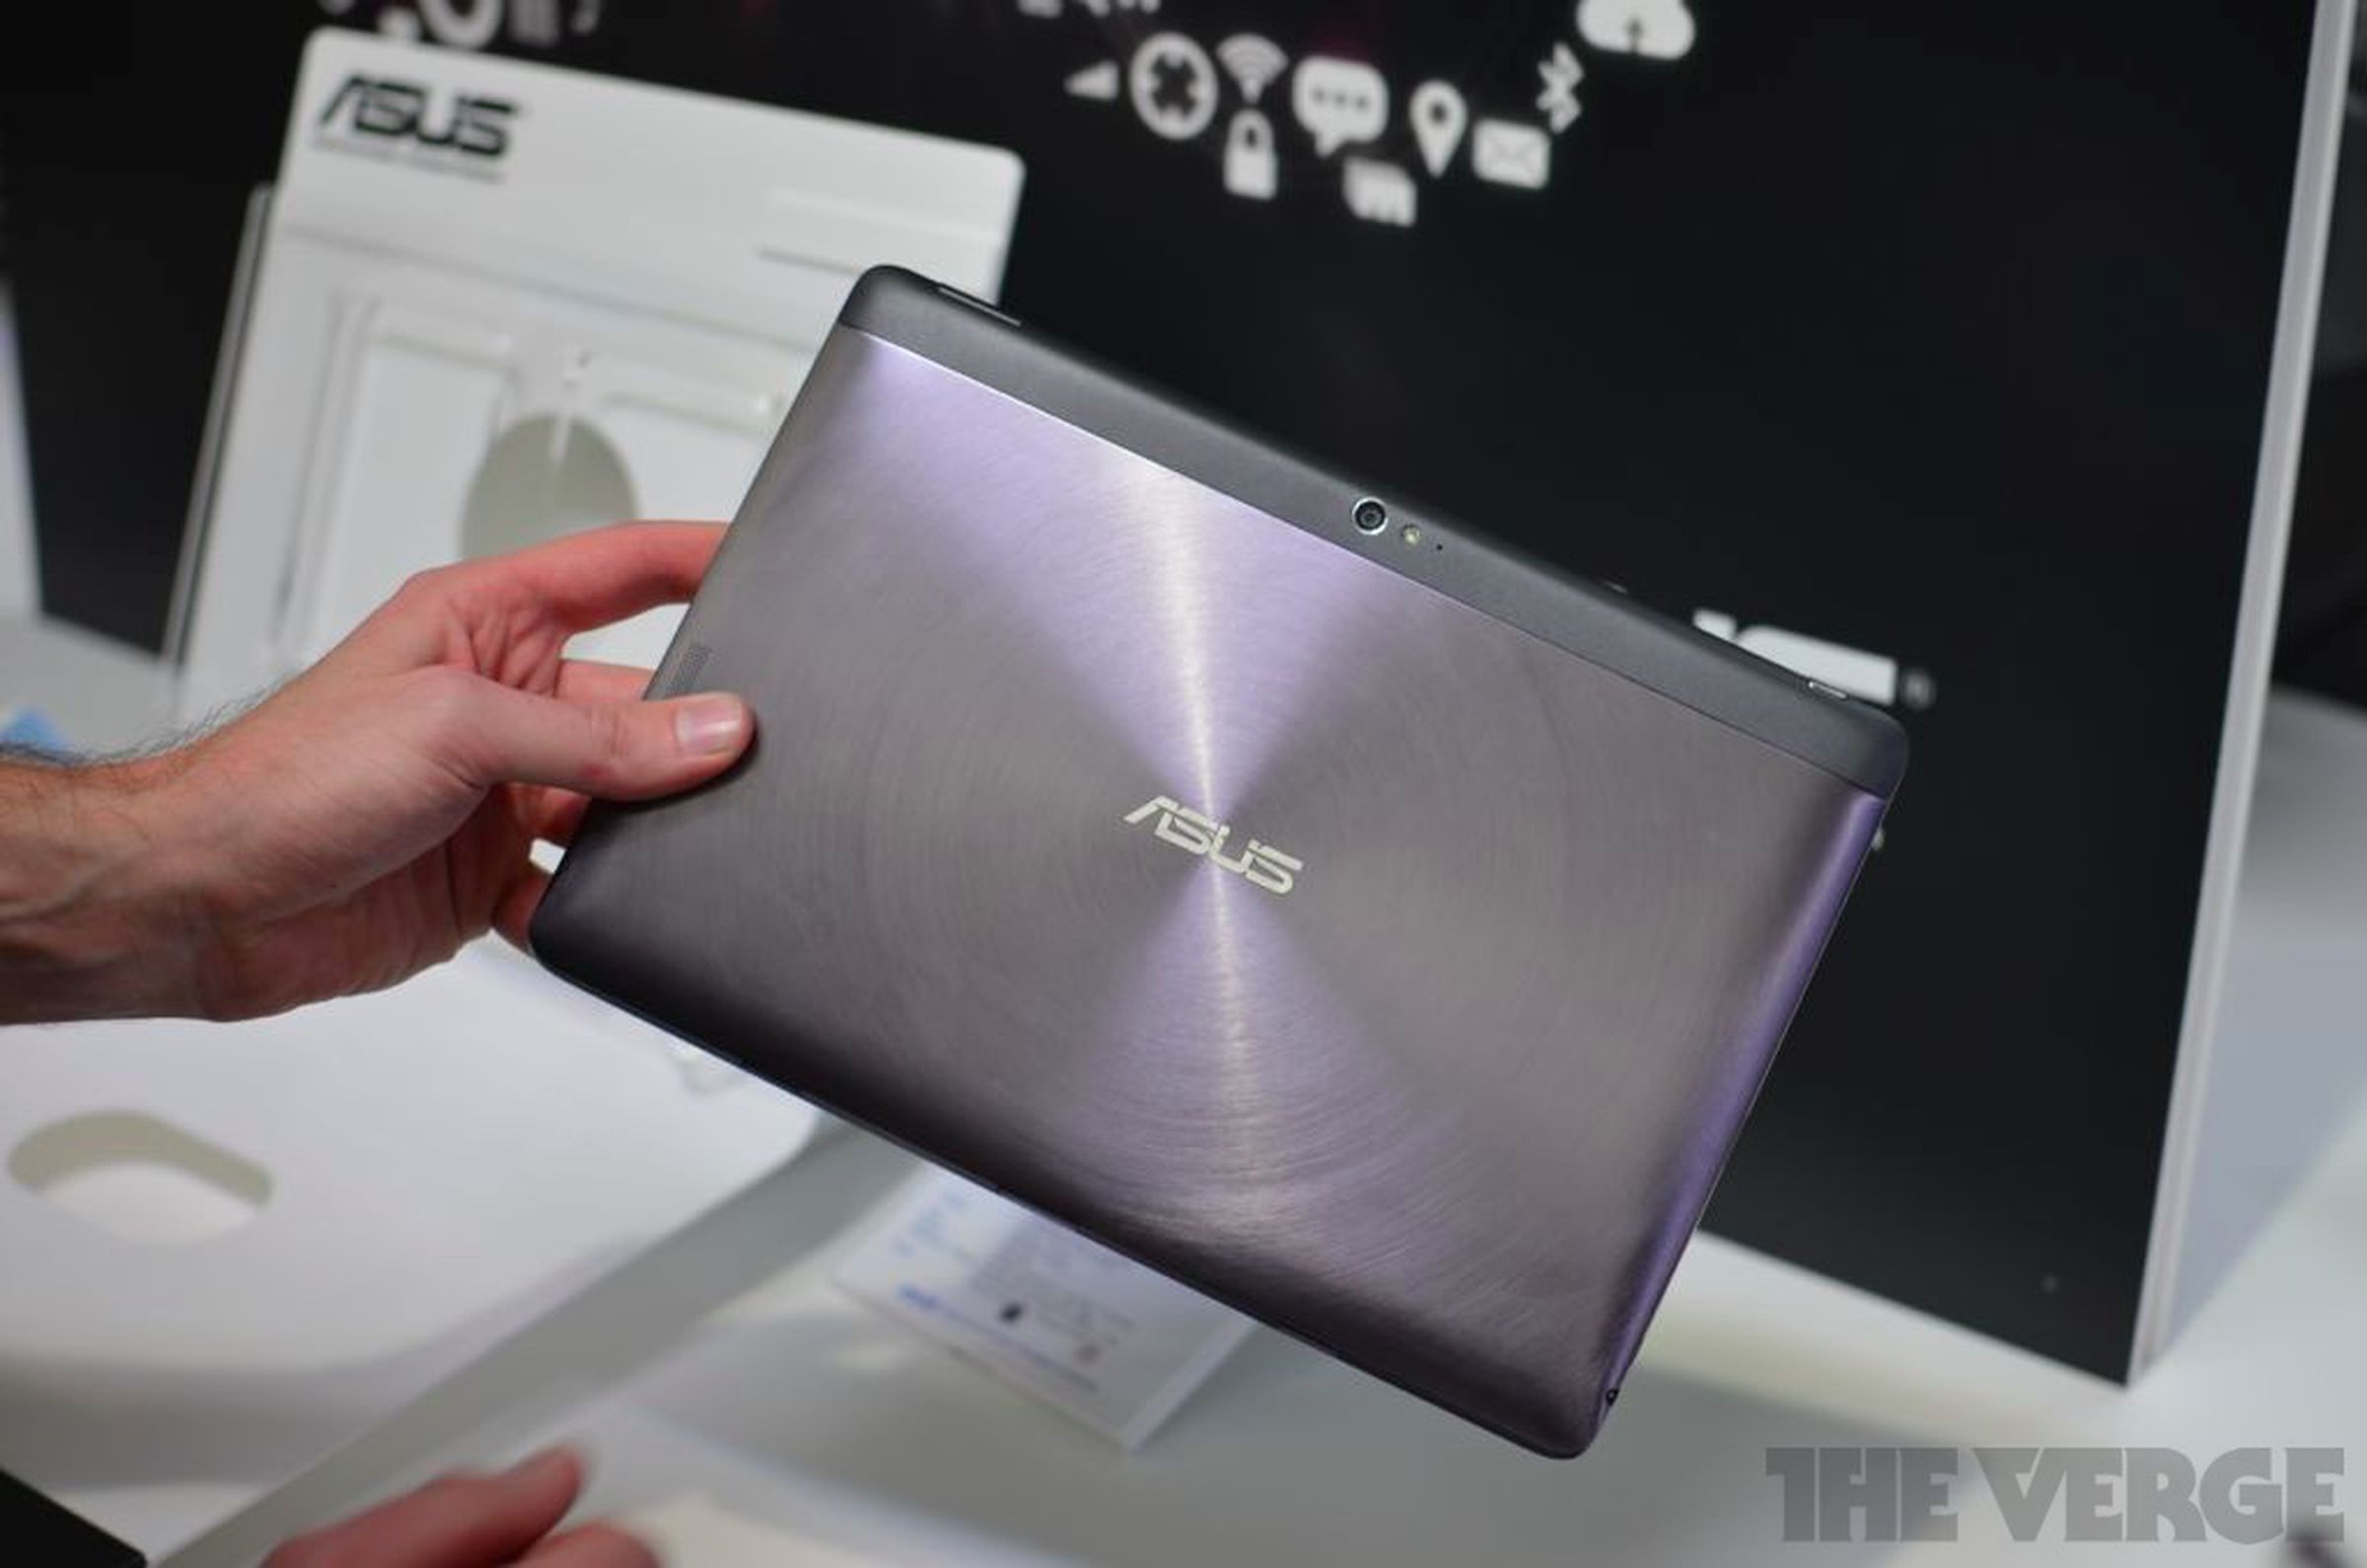 Asus Tranformer Pad Infinity Series and Transformer Pad 300 series pictures